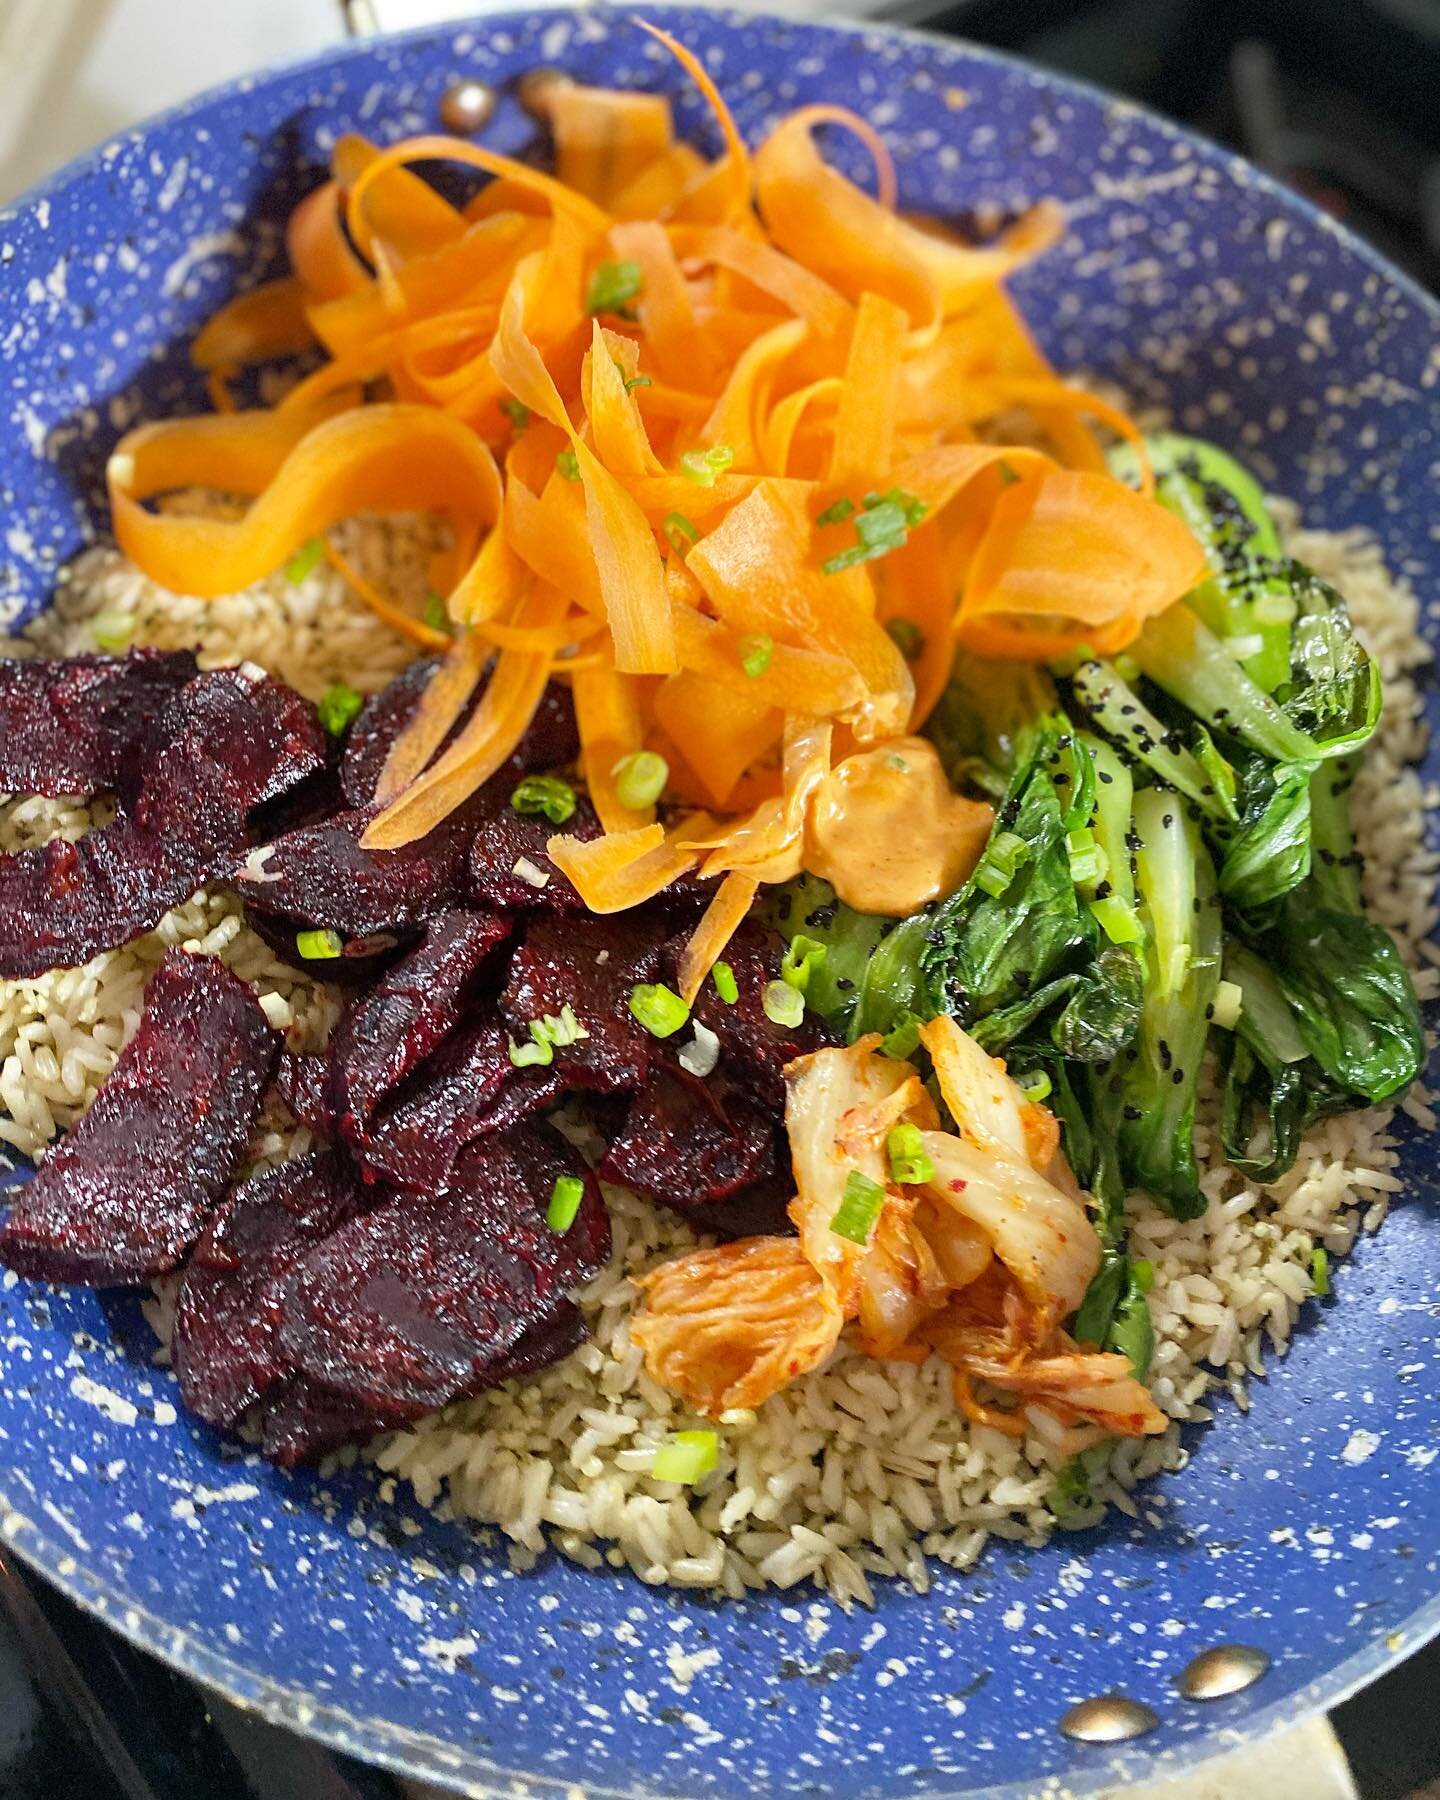 Dark nights, colorful foods 🌈 

Have you ever tried Korean BiBimBap? 🤤 

This @purplecarrot version made me feel comfortable attempting it at home 🙌

The crispy hempseed rice is topped with Gochujang Roasted Beets, Carrot Ribbons, Bok Choy, Kimchi